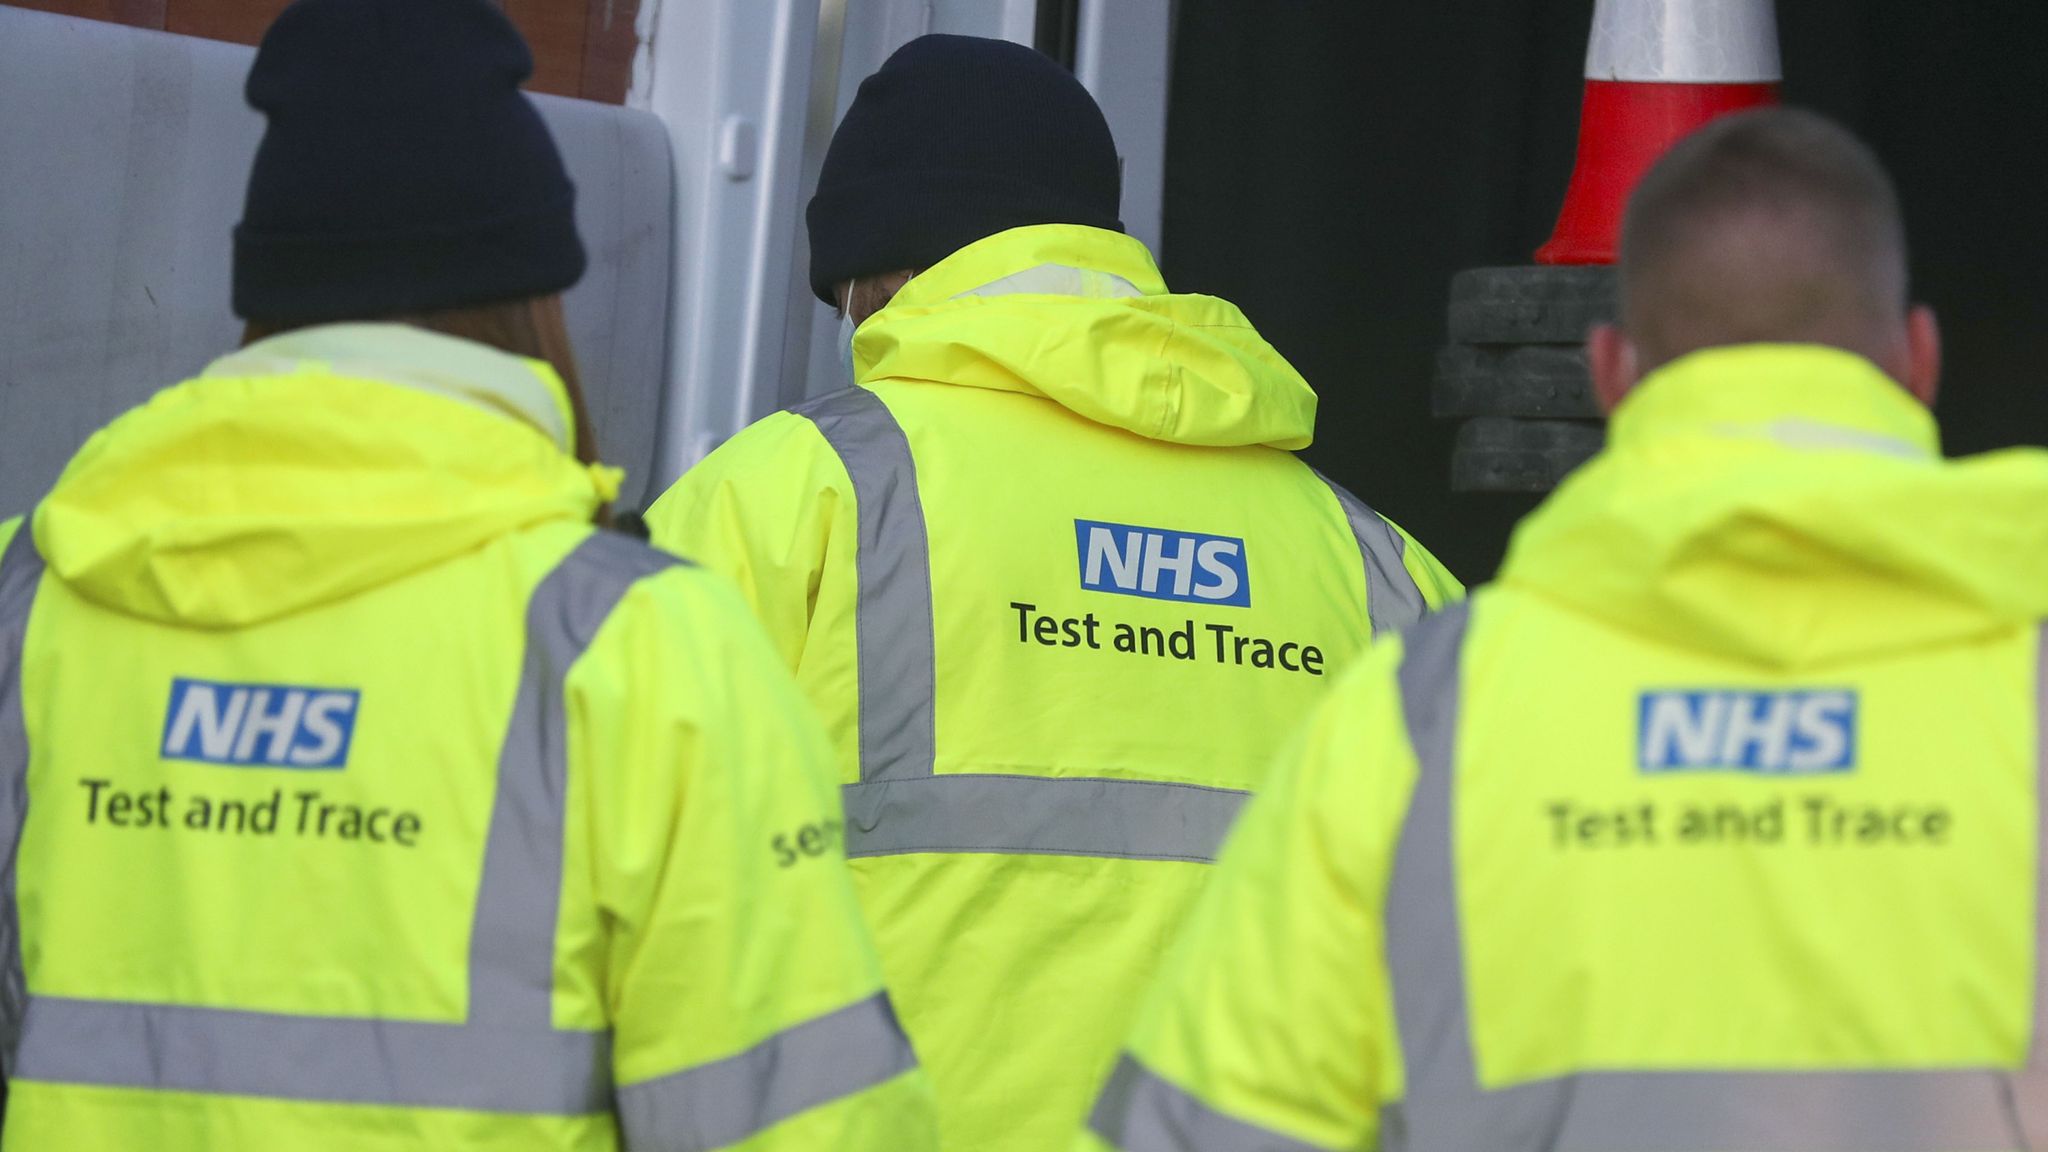 COVID-19: NHS Test and Trace 'unaffected' by cyber attack at Serco, firm says